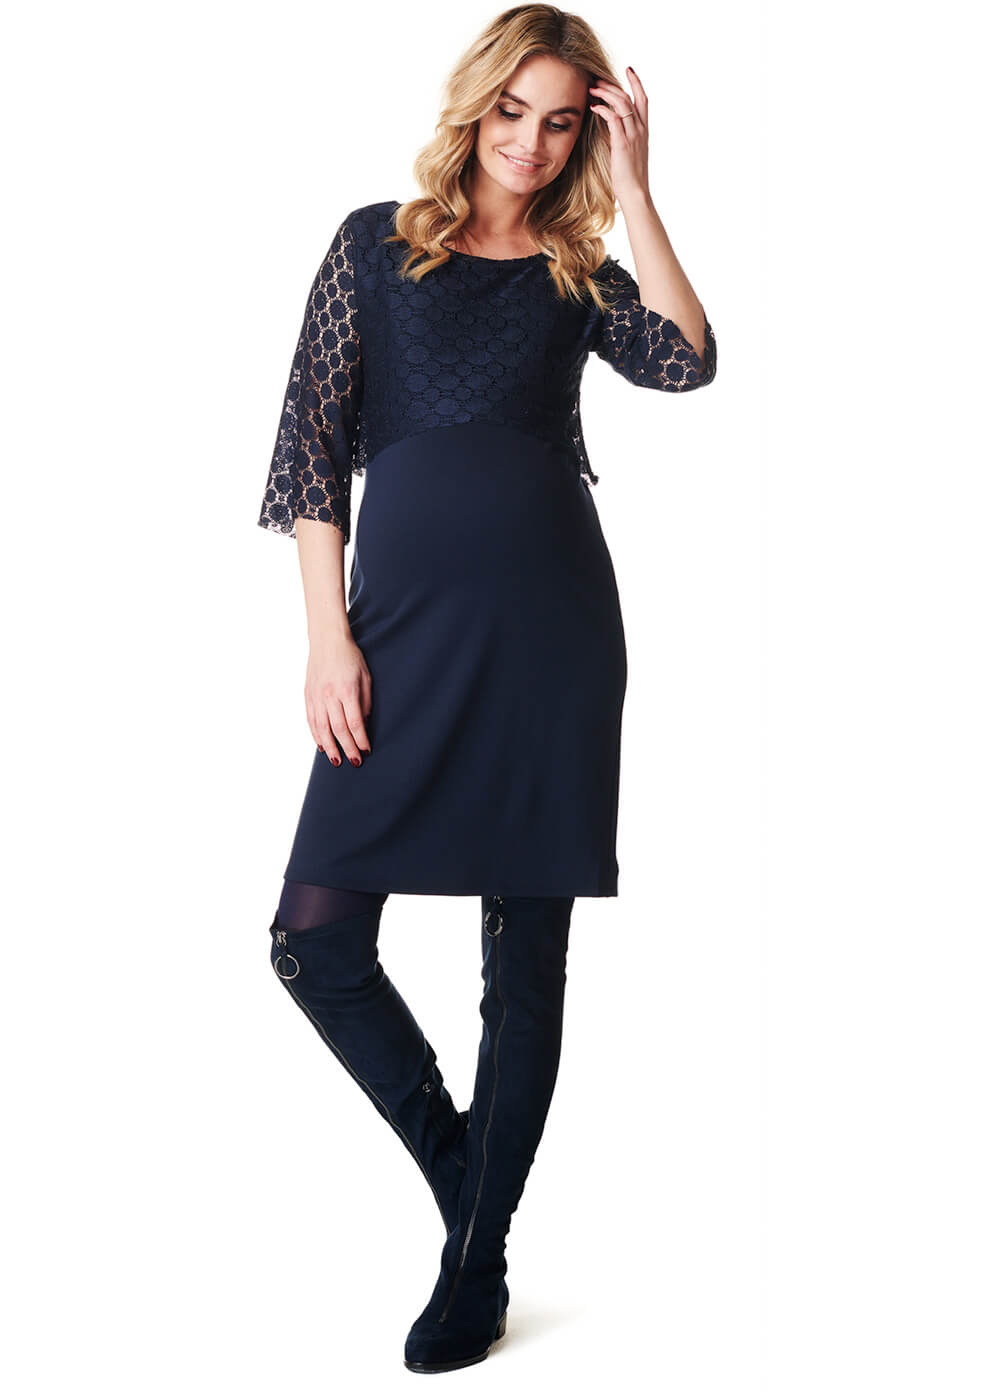 Marron Lace Overlay Maternity & Nursing Dress by Noppies